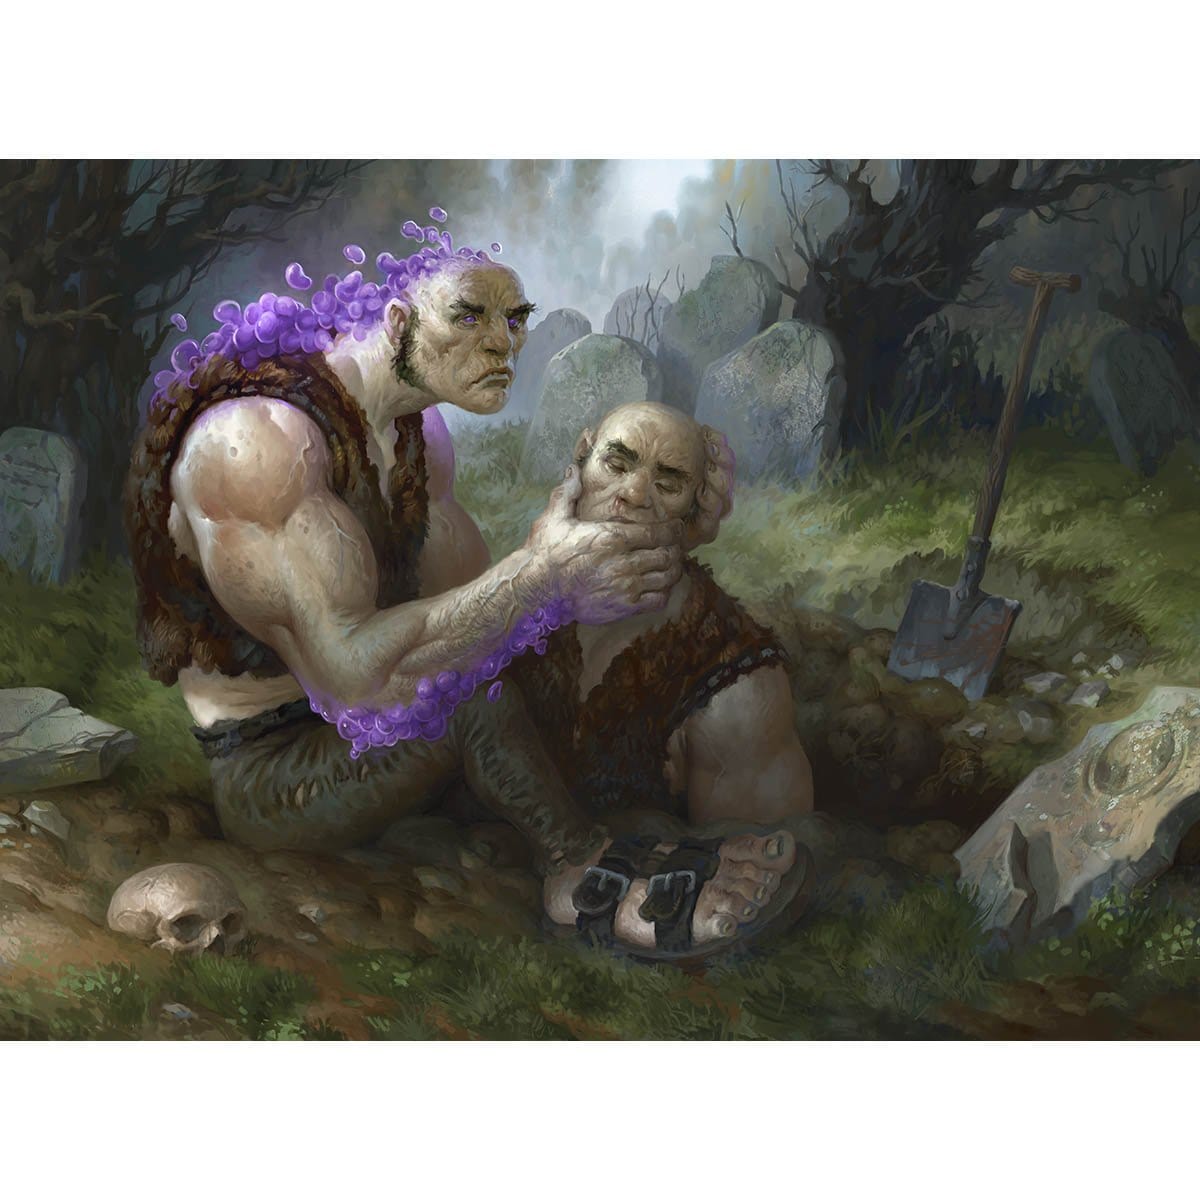 Graveshifterl Print - Print - Original Magic Art - Accessories for Magic the Gathering and other card games